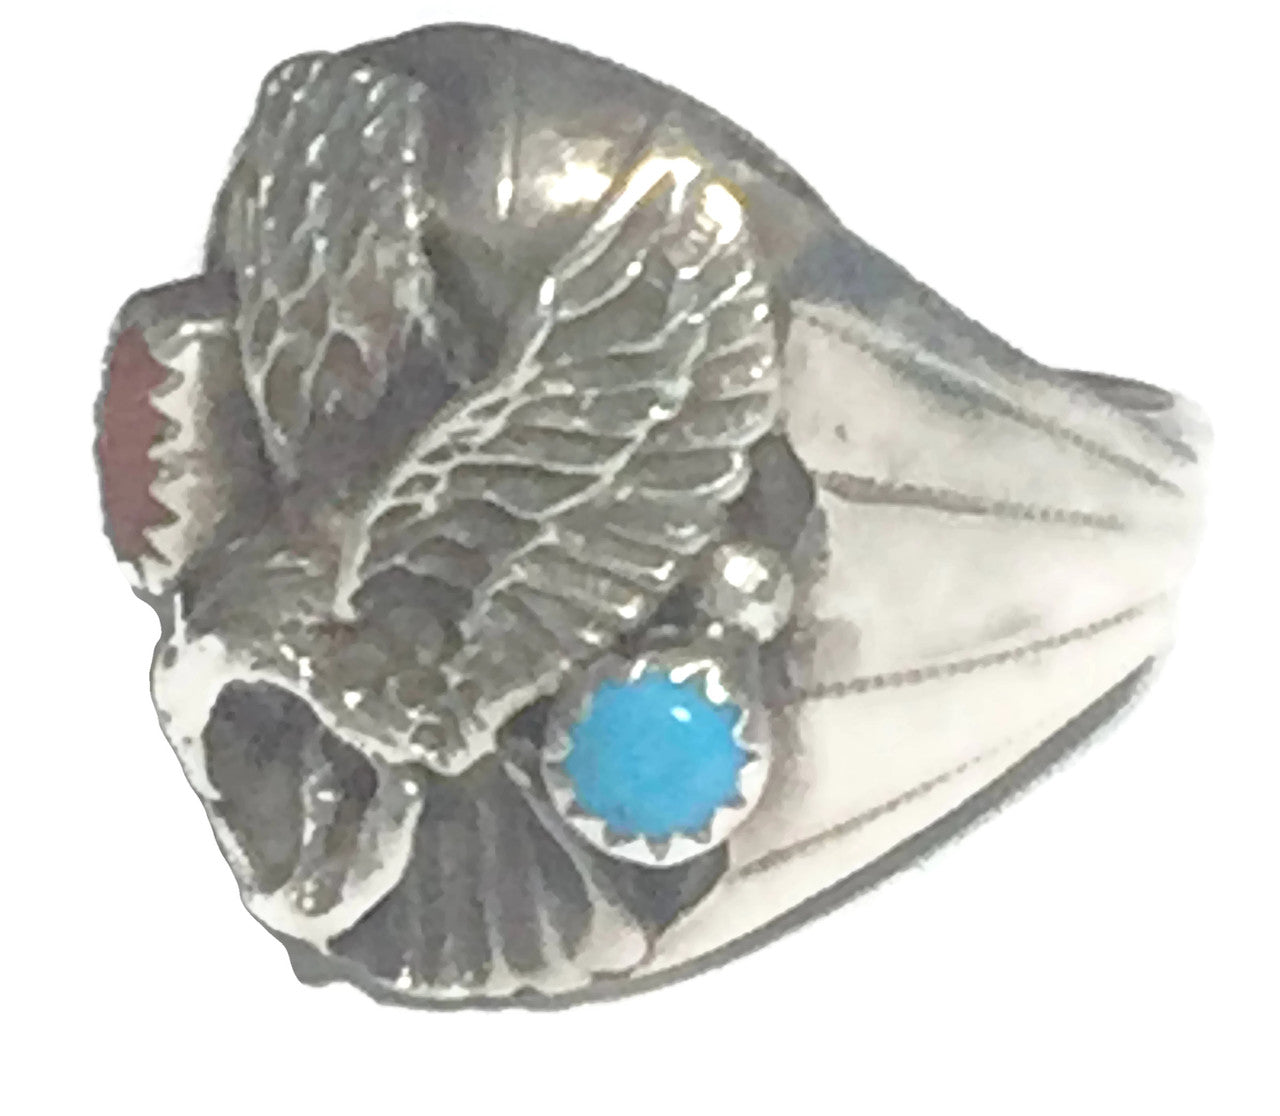 Navajo Eagle Ring Turquoise Coral Sterling Silver Size 12.5